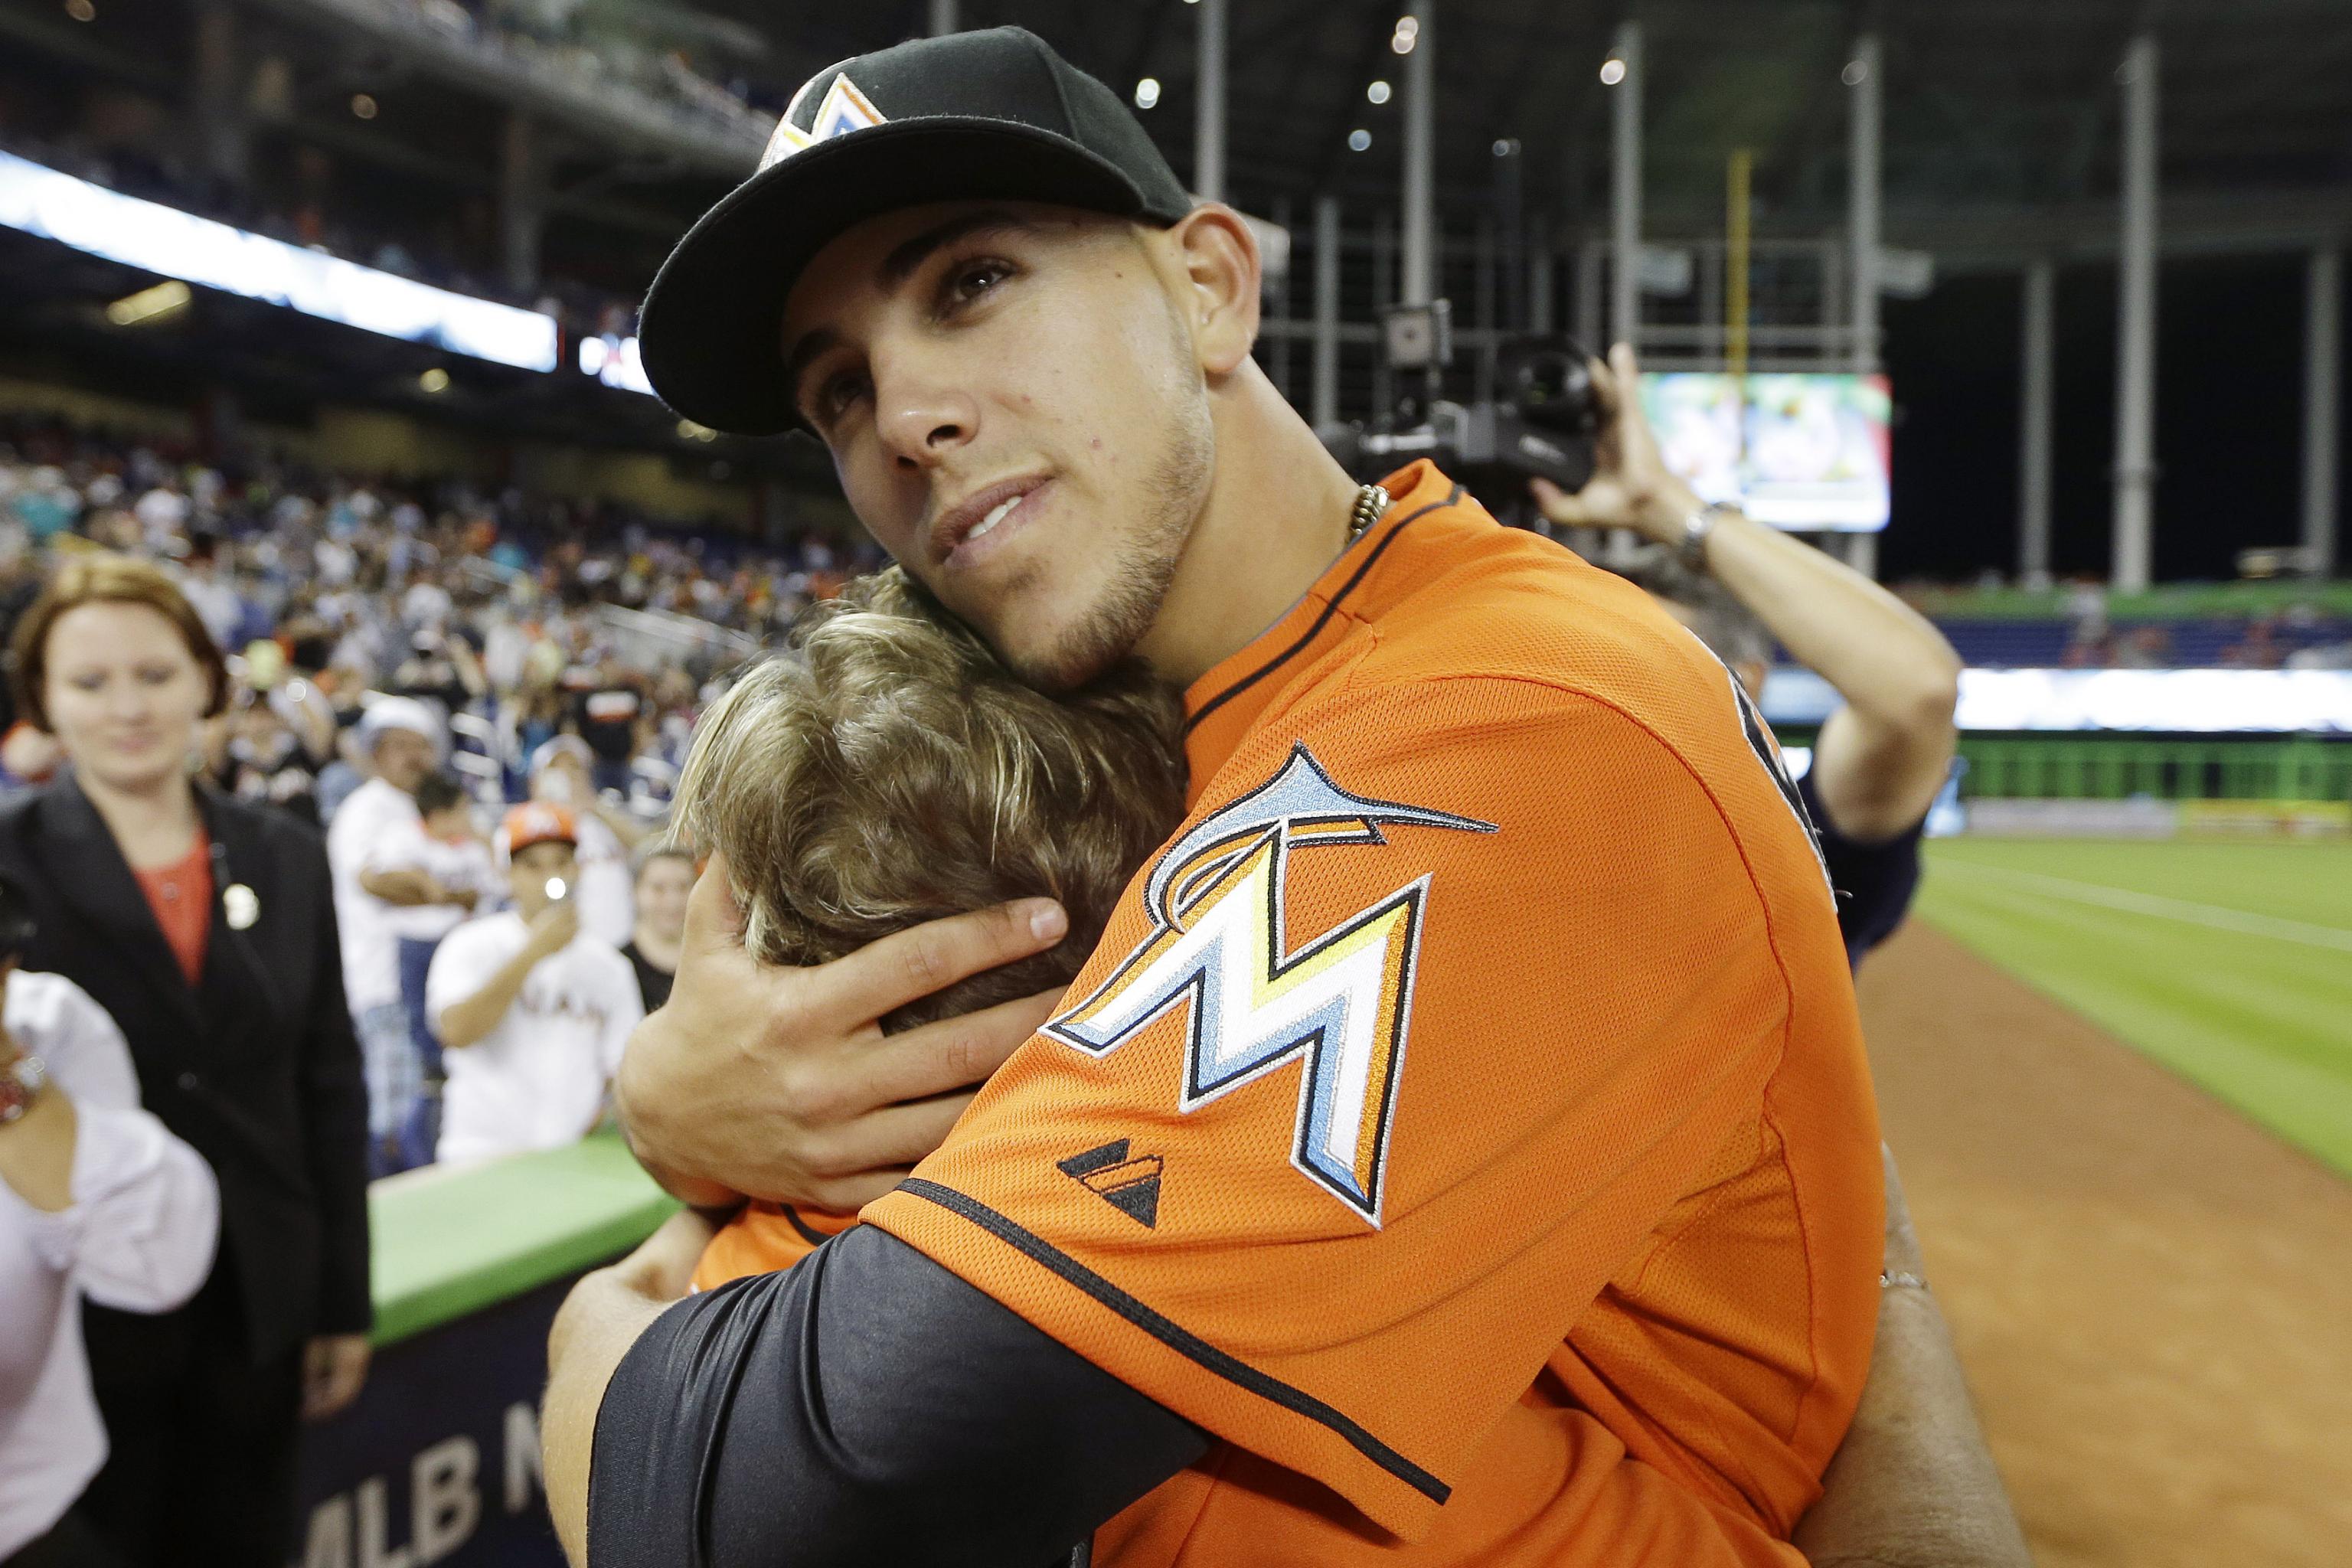 Fish Bites: Miami Marlins Opening Day For Jose Fernandez, His Mother, and  Grandmother - Fish Stripes